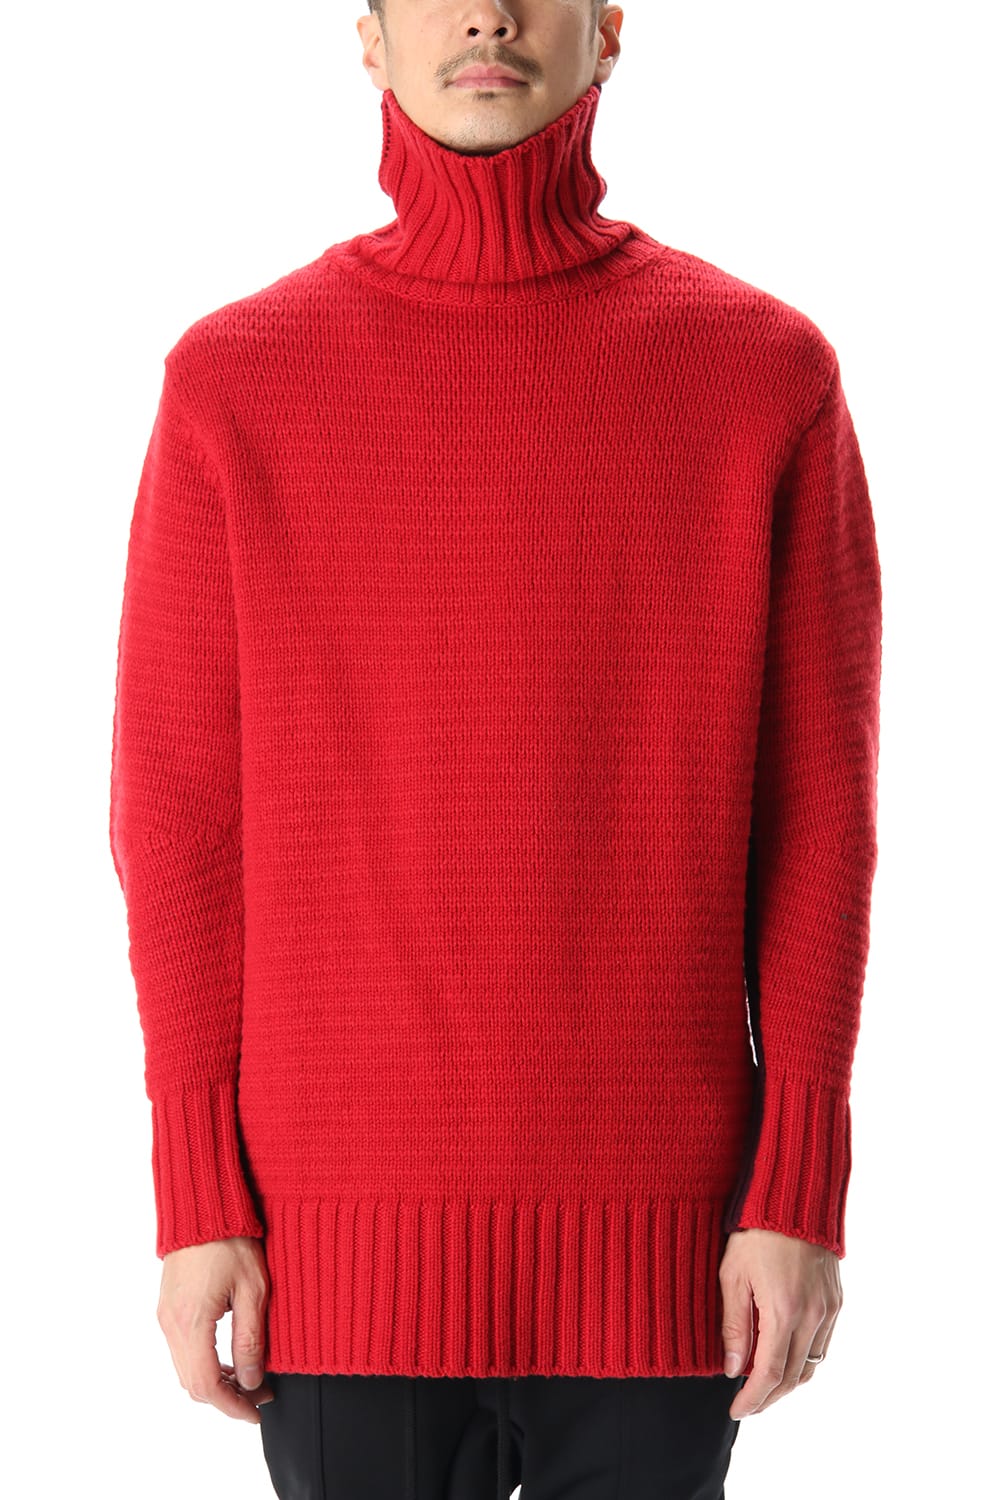 doubleface-knit-jersey-rb-239-red-burgundy | ダブルフェイス ニット 